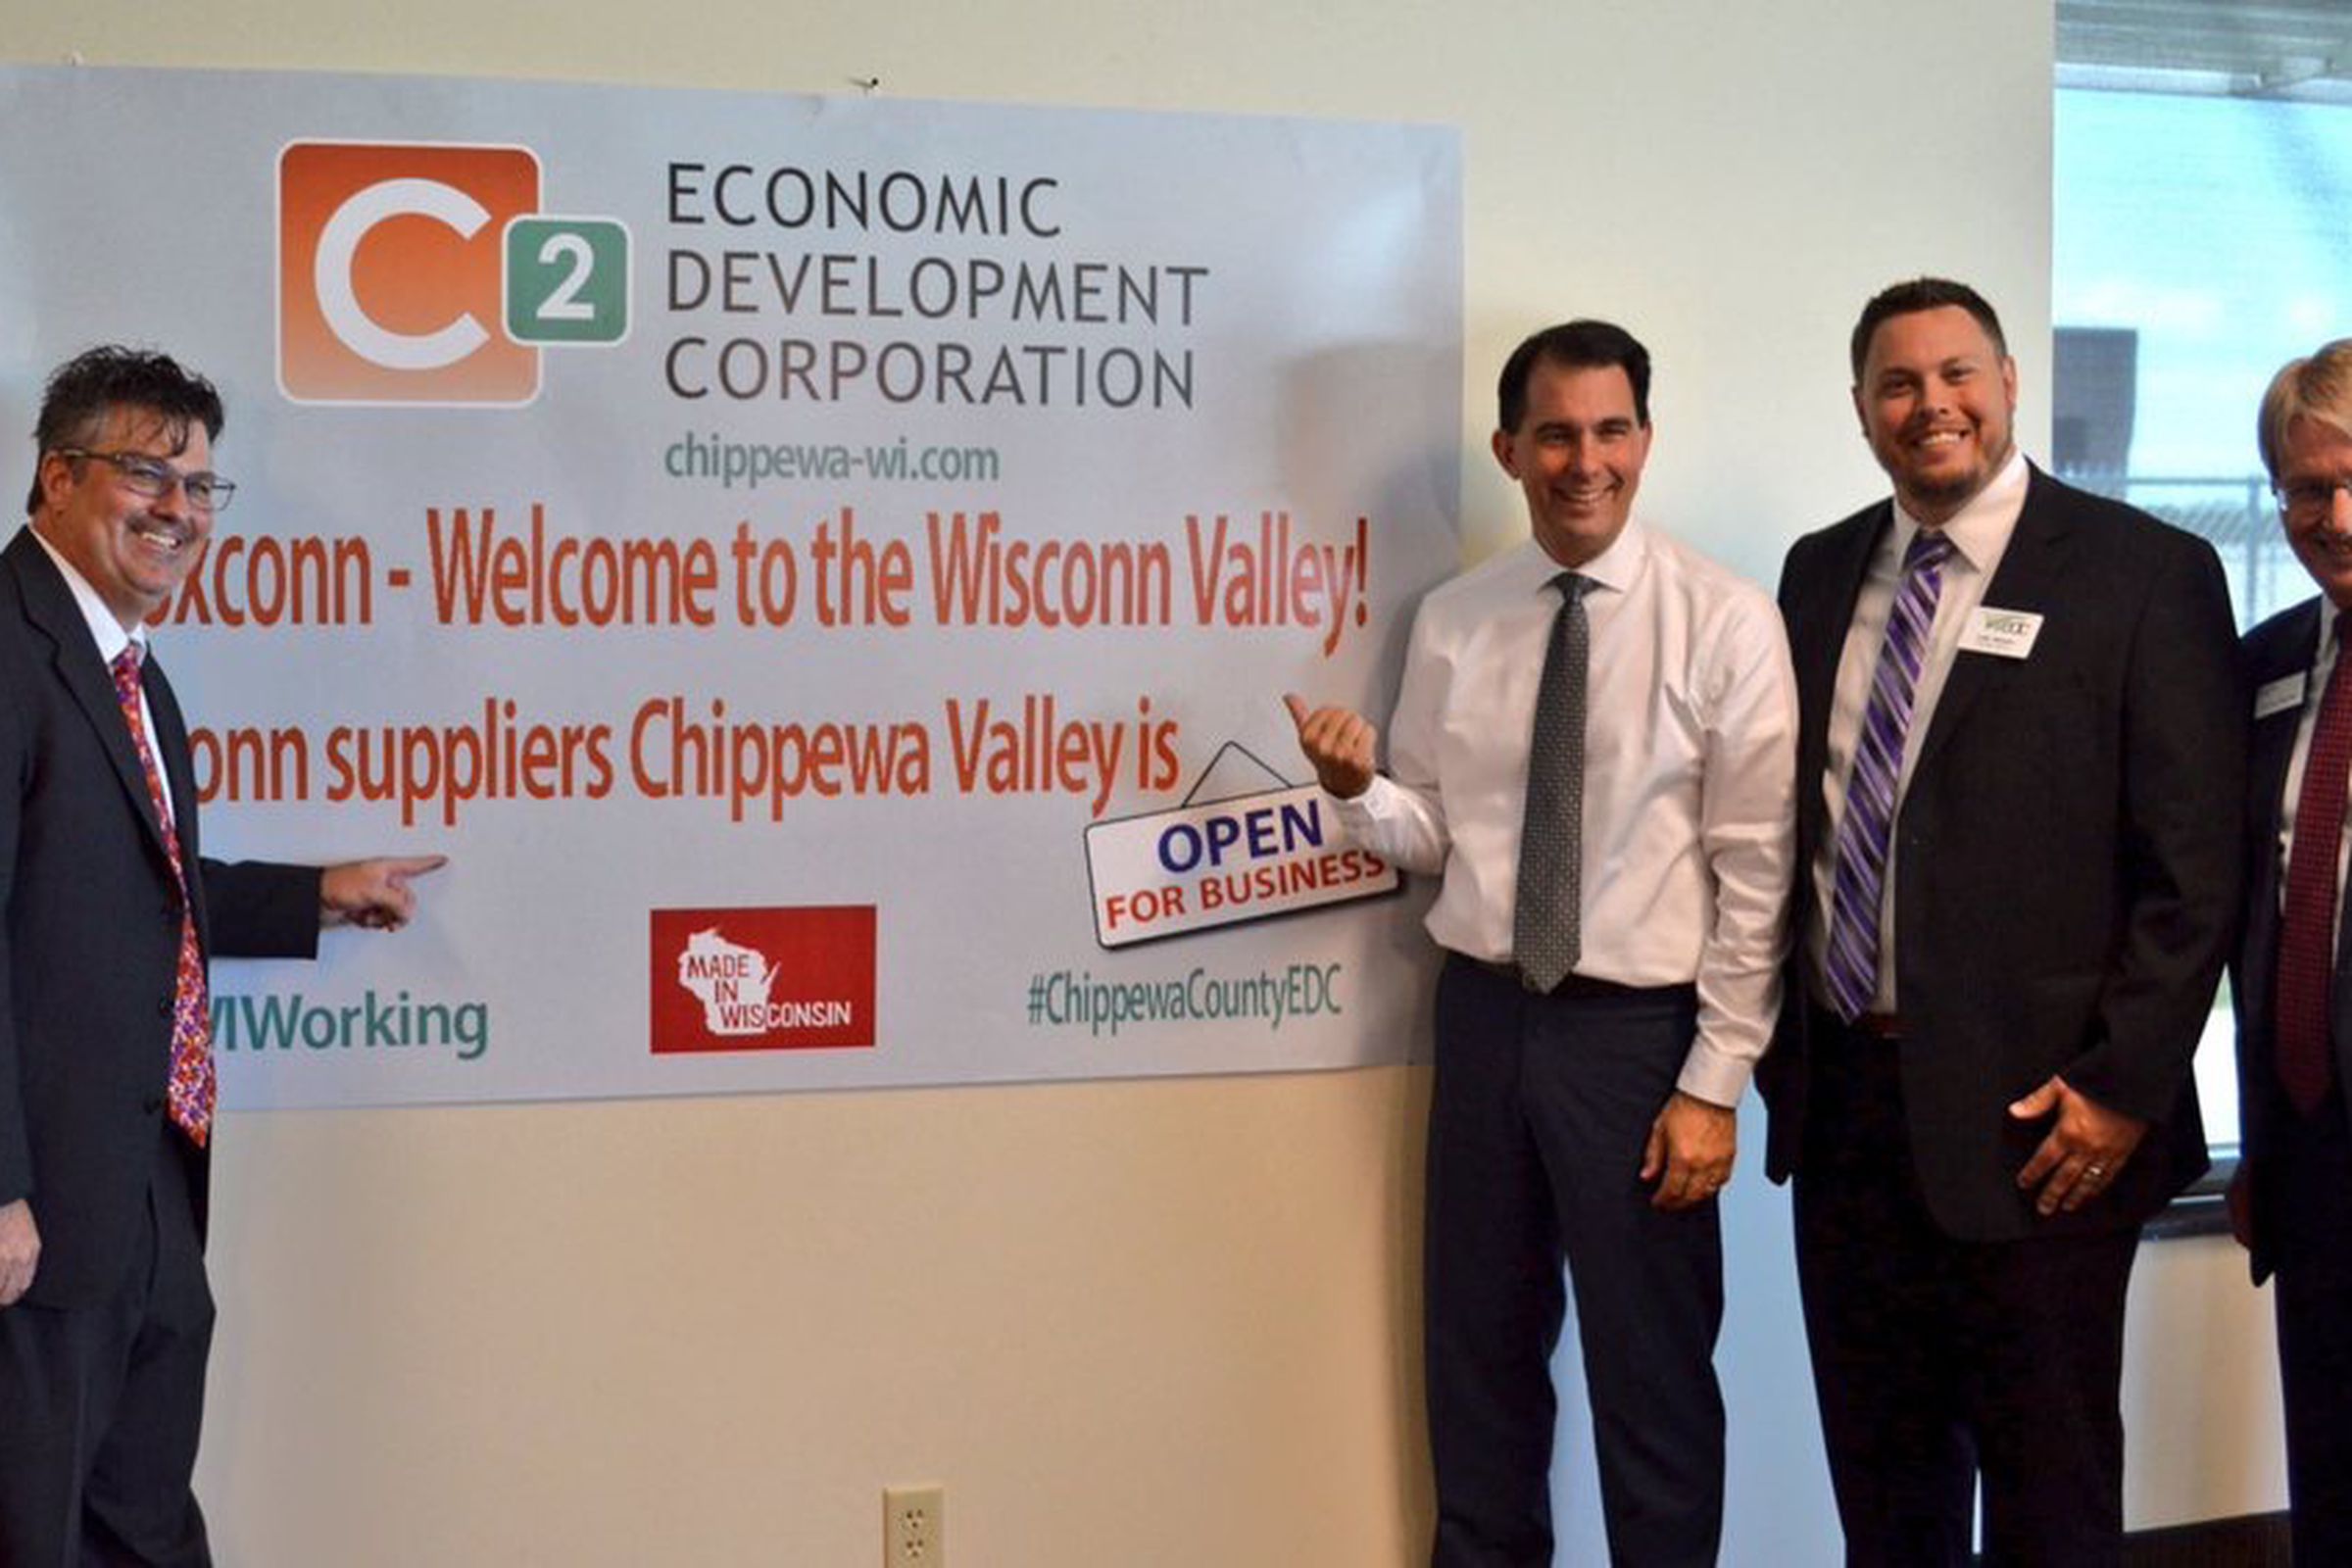 Scott Walker and the Wisconn Valley sign